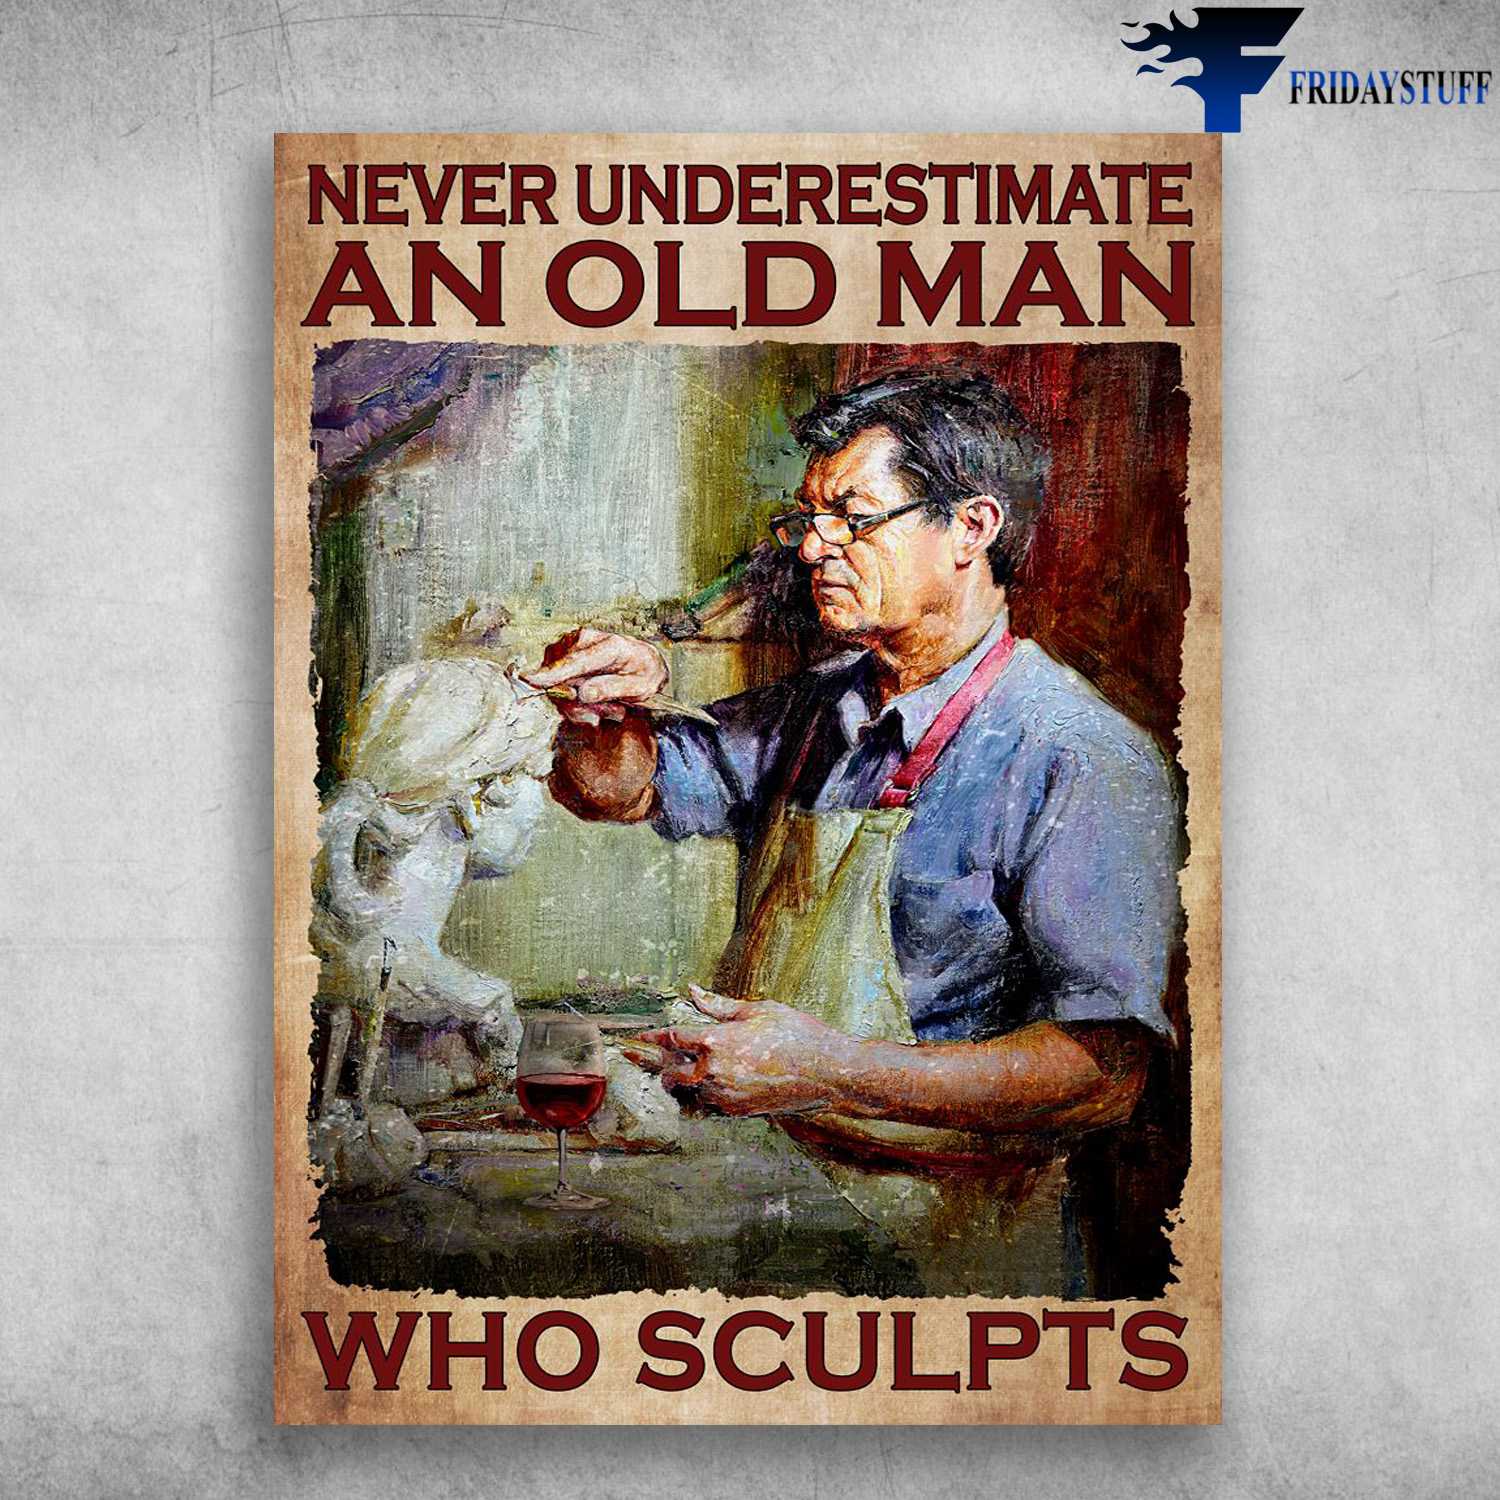 Sculpt Man, Sculpt And Wine - Never Underestimate An Old Man, Who Sculpts, Gift For Sculpt Lover